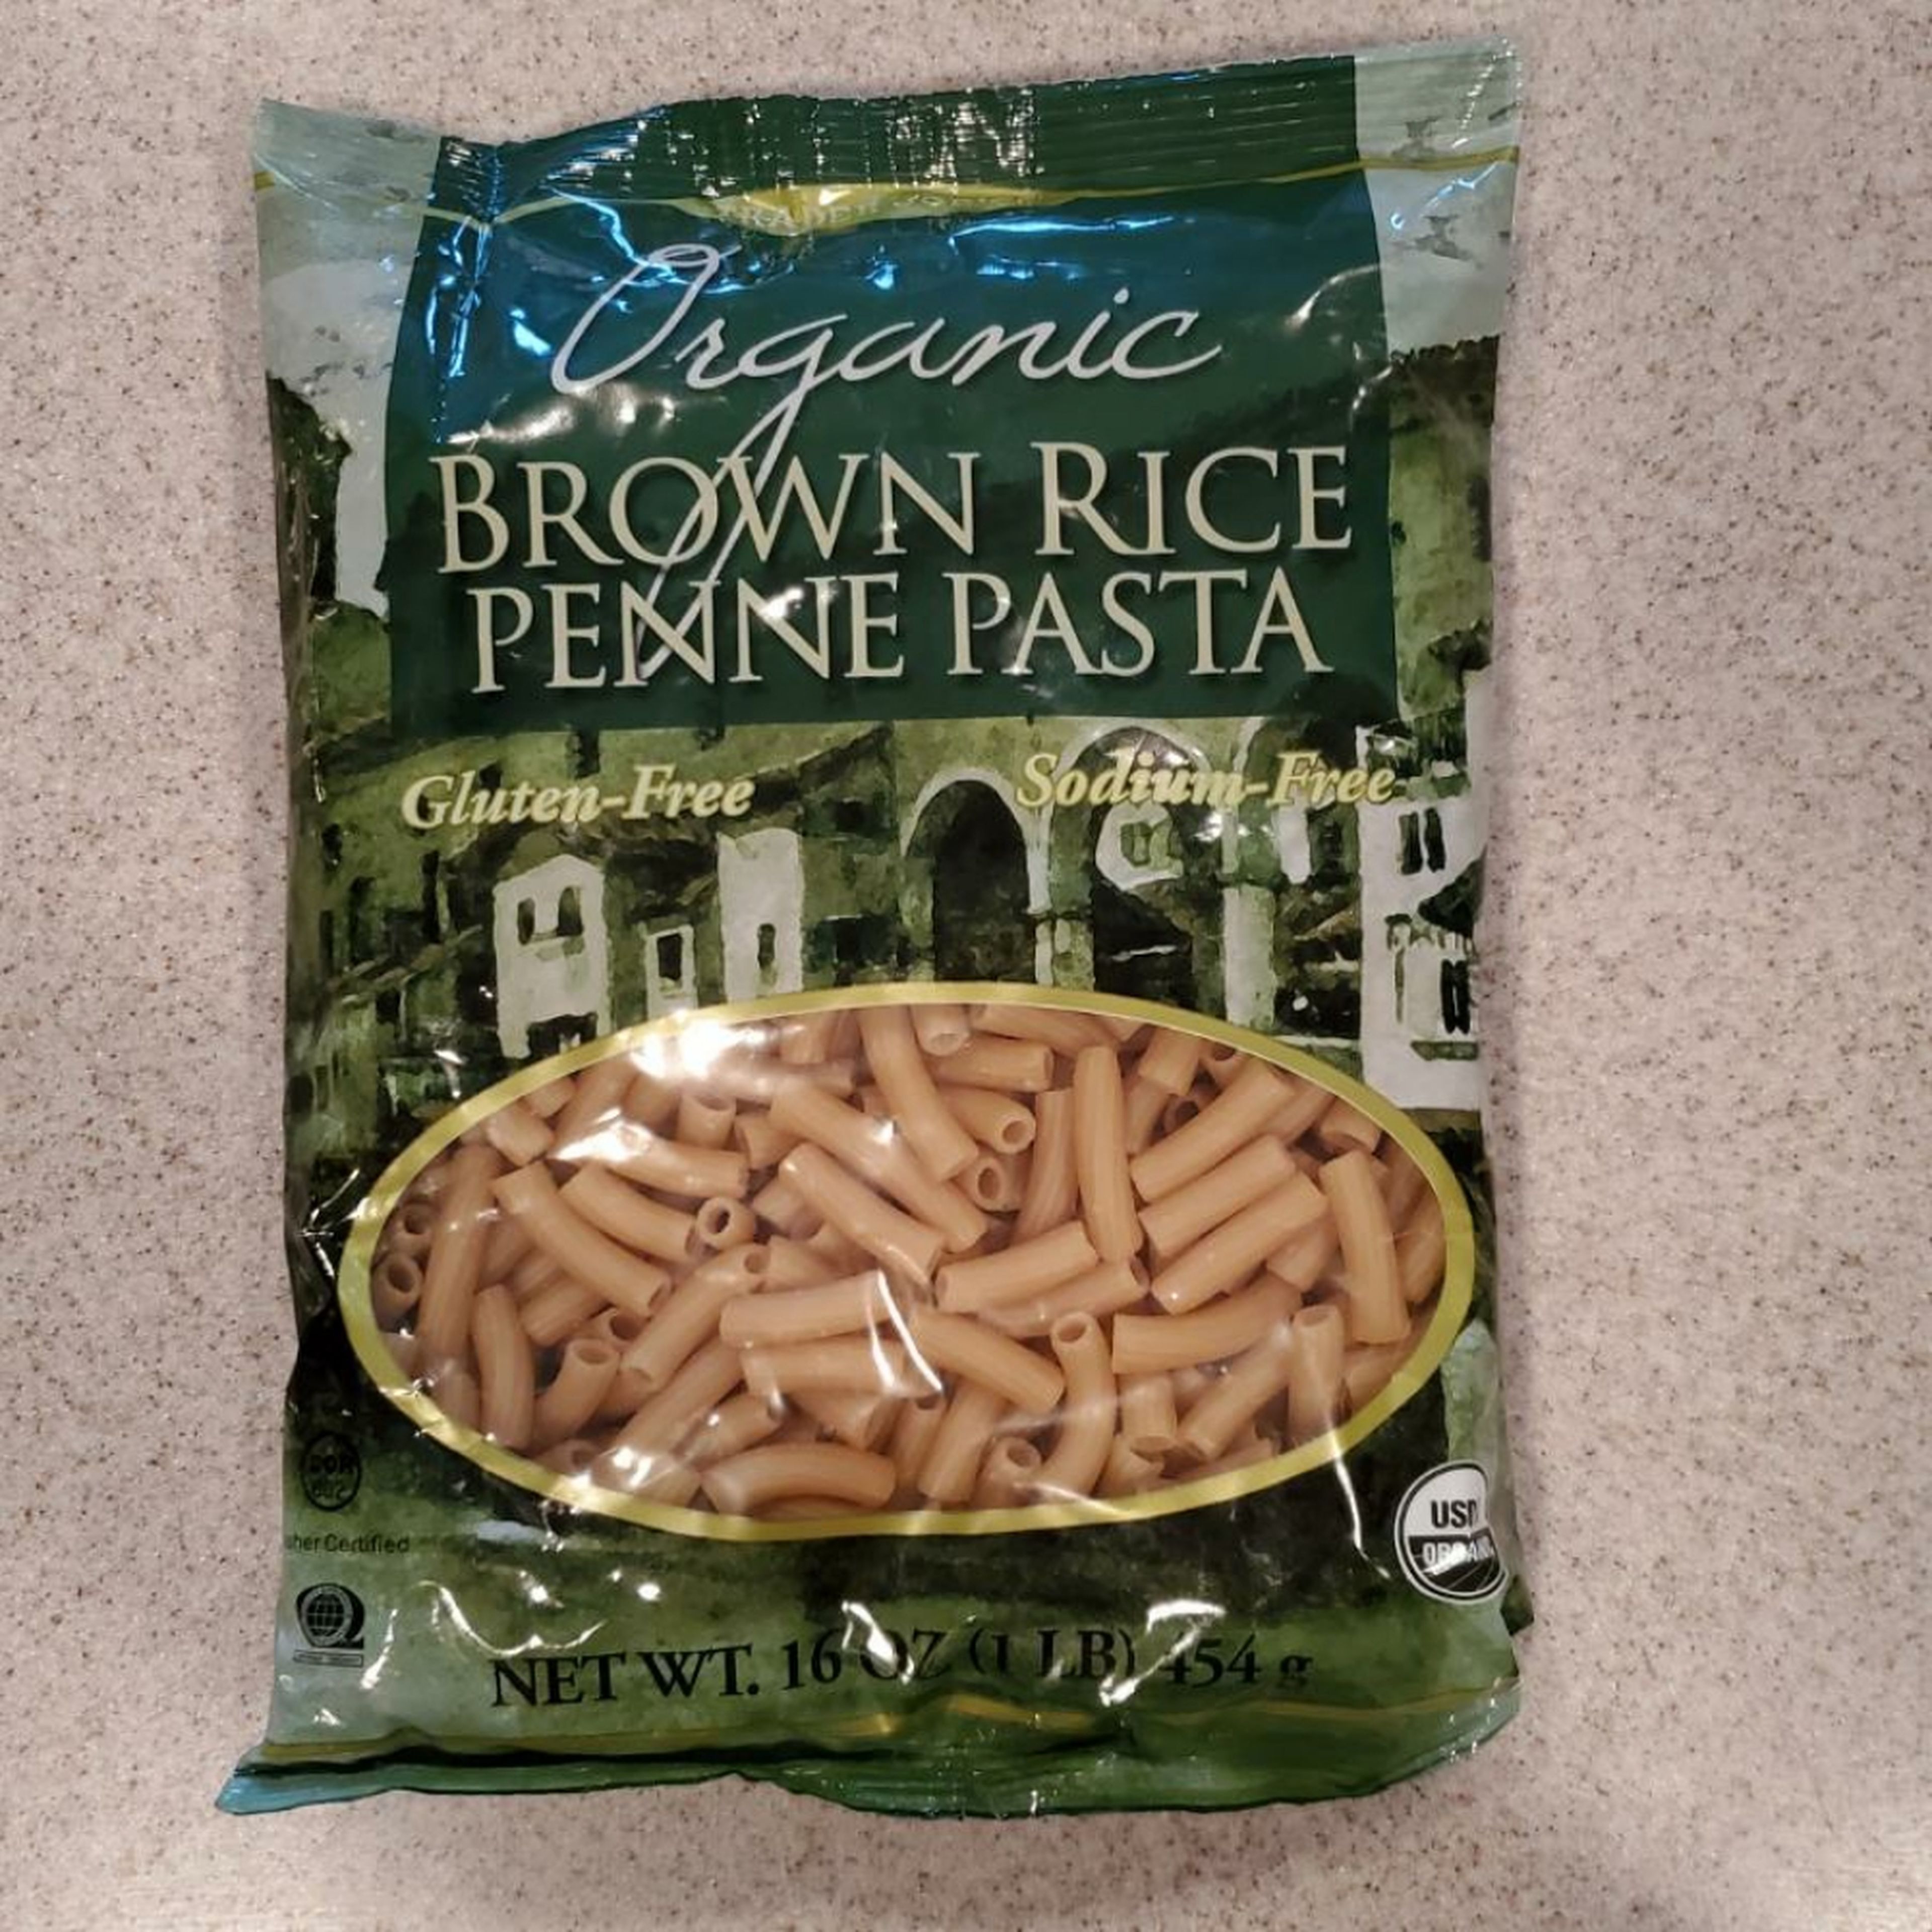 Boil water and add pasta. Cook according to packaging.